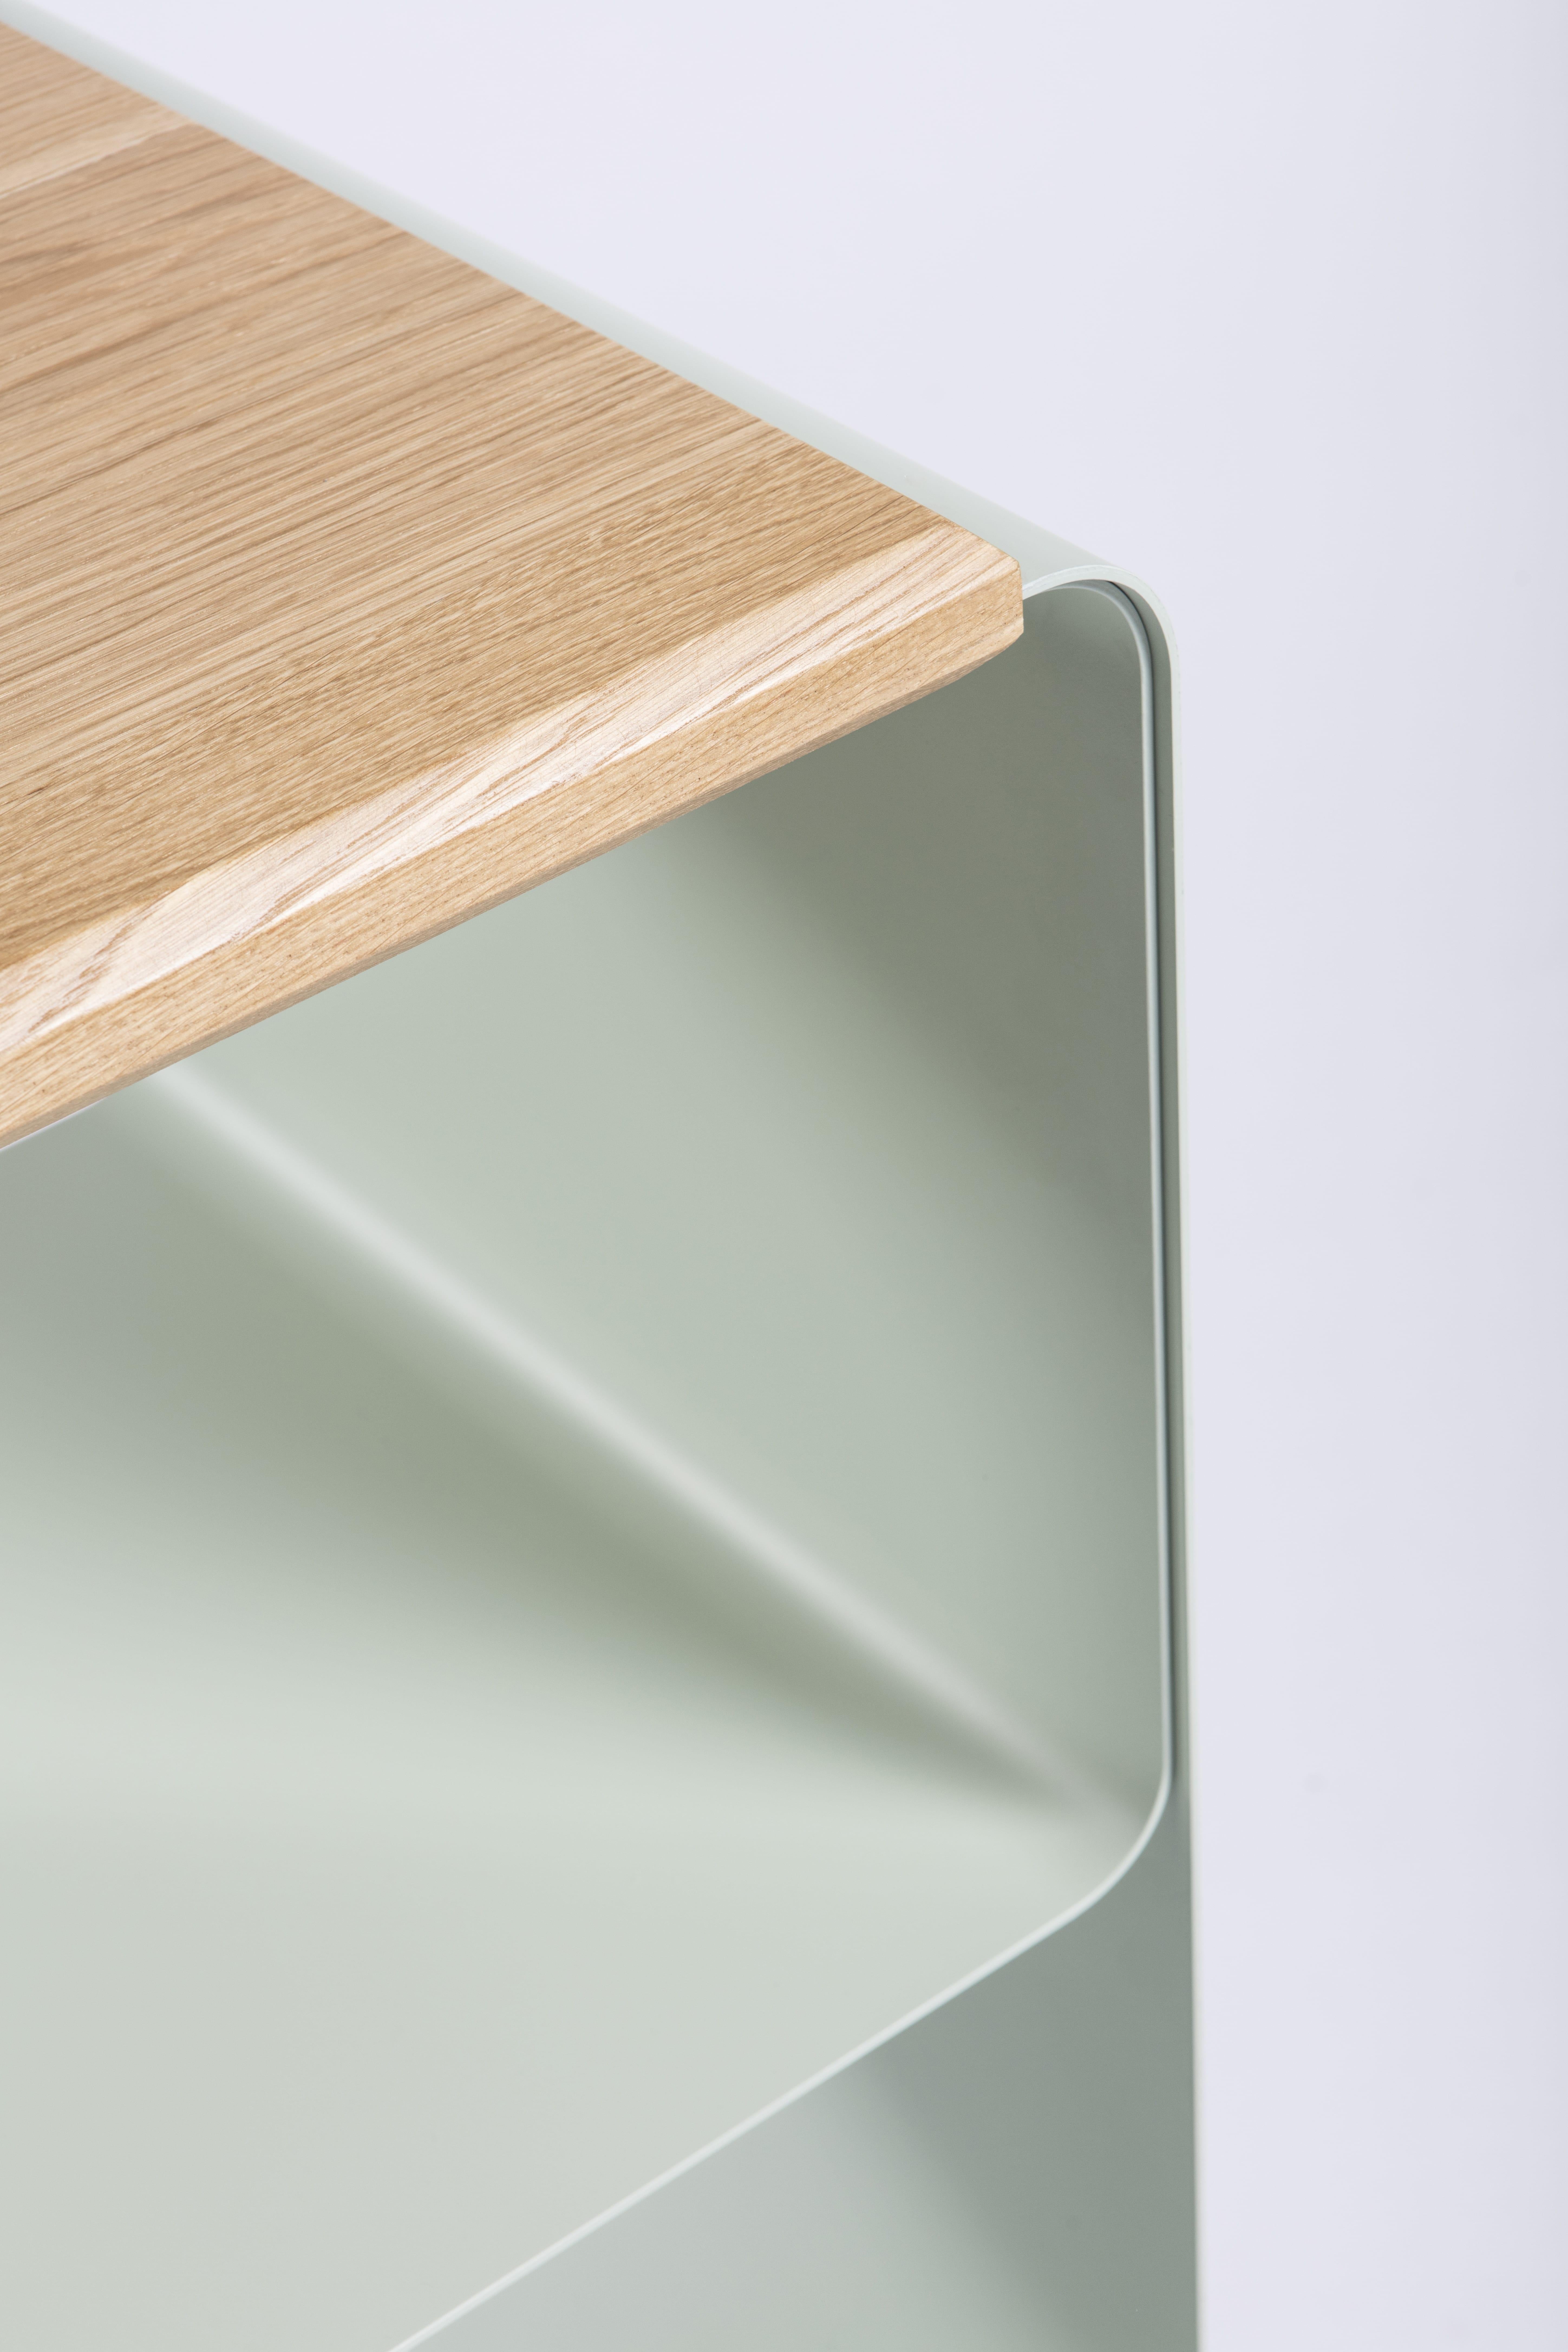 Vodo is a collection made up of folded sheet metal structures and solid wood
shelves fixed by a joint. Whether it is our bench, stool, console or bookcase,
Vodo will be perfect for any environment thanks to its clean line and lightness.
Vodo is a